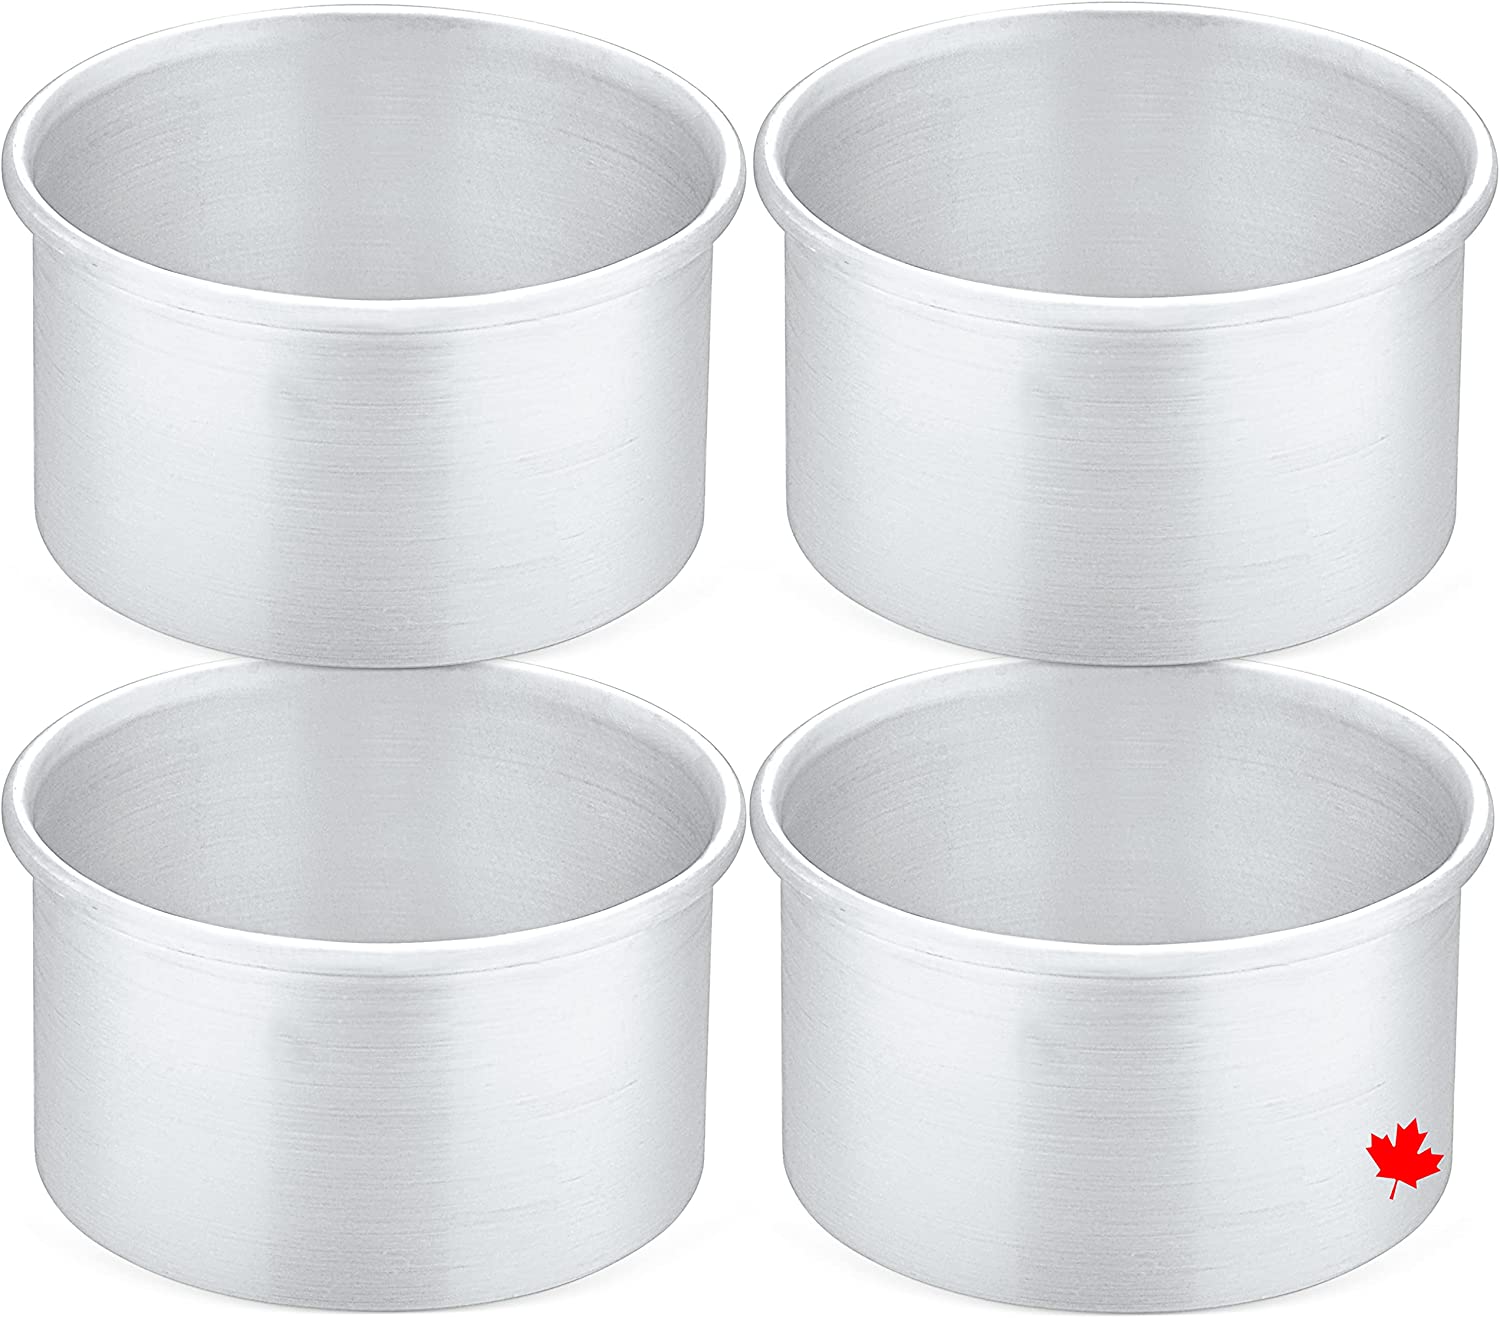 8x3 inch Round Cake Tin with Loose Base | Silverwood Bakeware